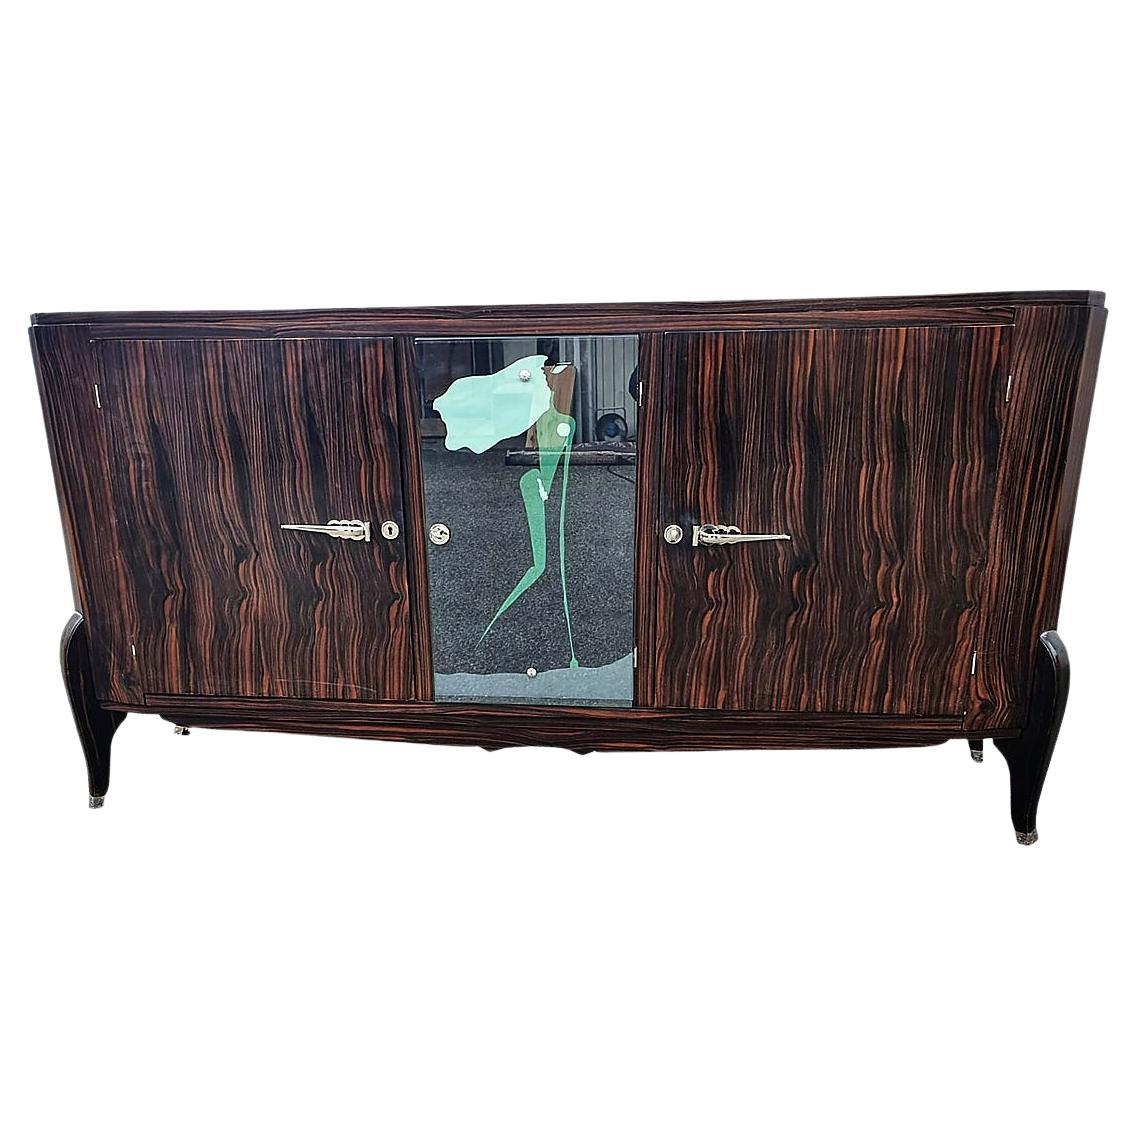 Art Deco Sideboard Makassar from France Around 1925 with Painted Mirror